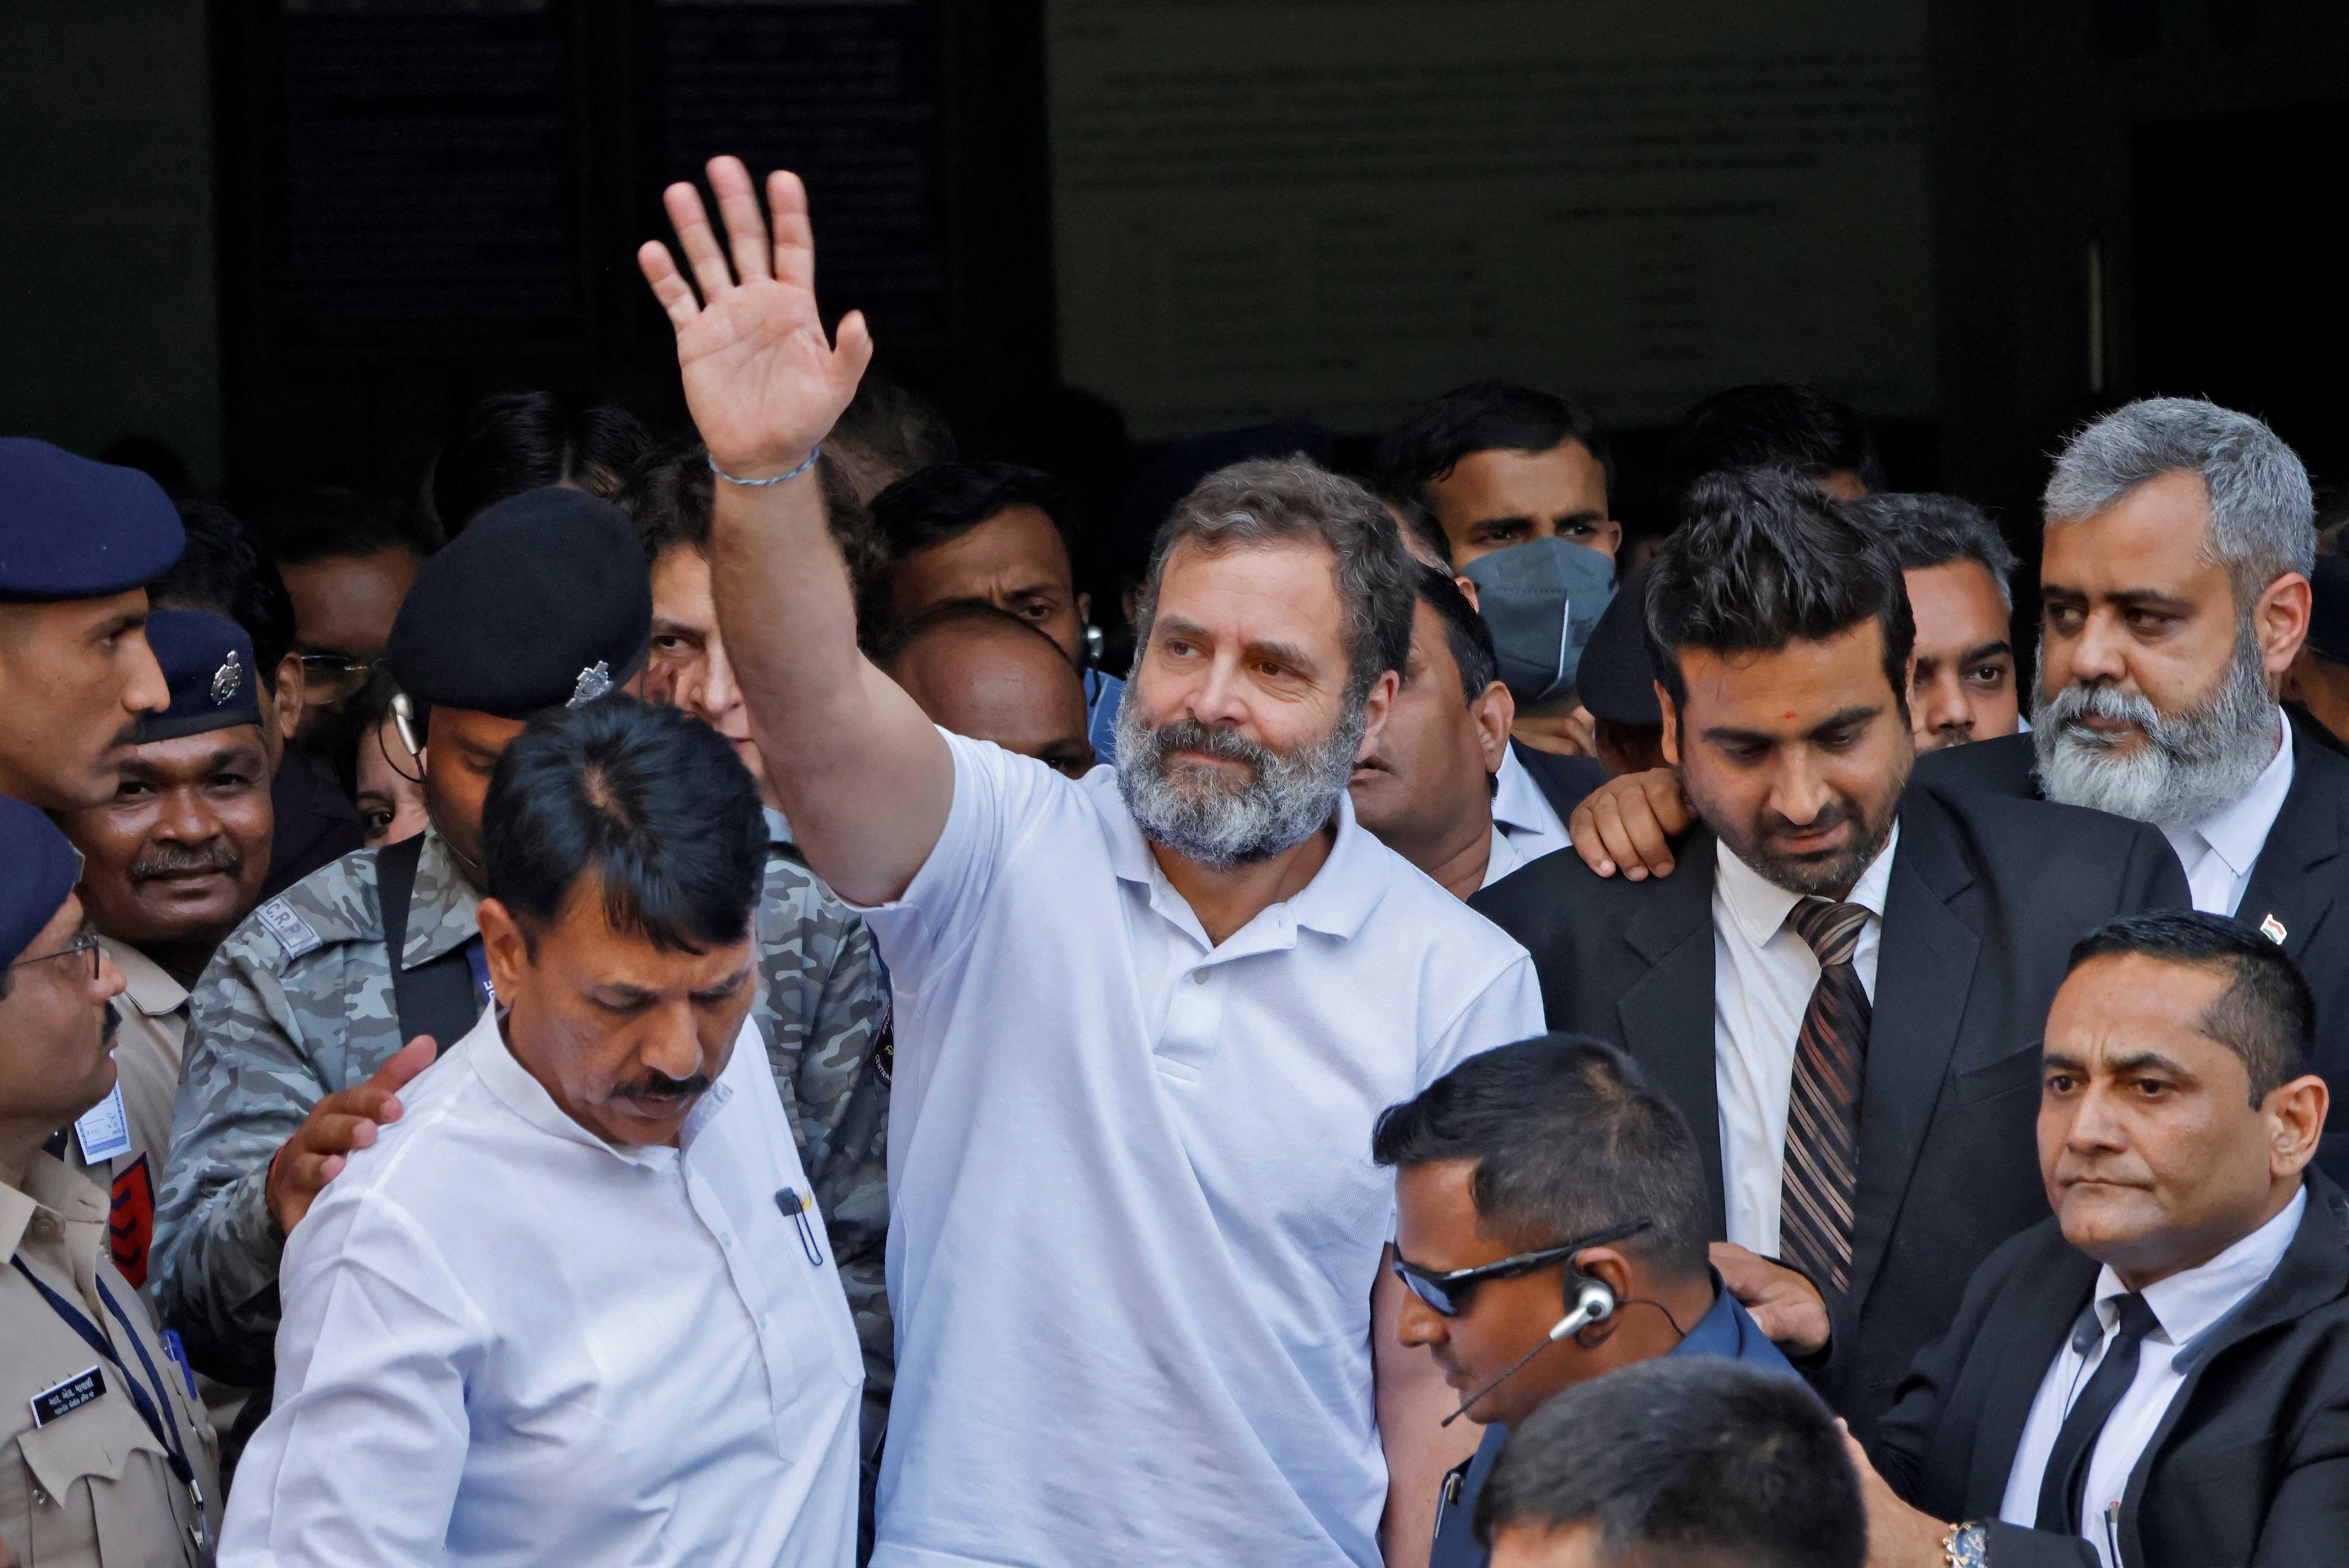 Rahul Gandhi, a senior leader of India's main opposition Congress party, waves as he leaves a court after he lodged an appeal against his conviction for defamation, in Surat in the western state of Gujarat, India, April 3. Photo: Reuters